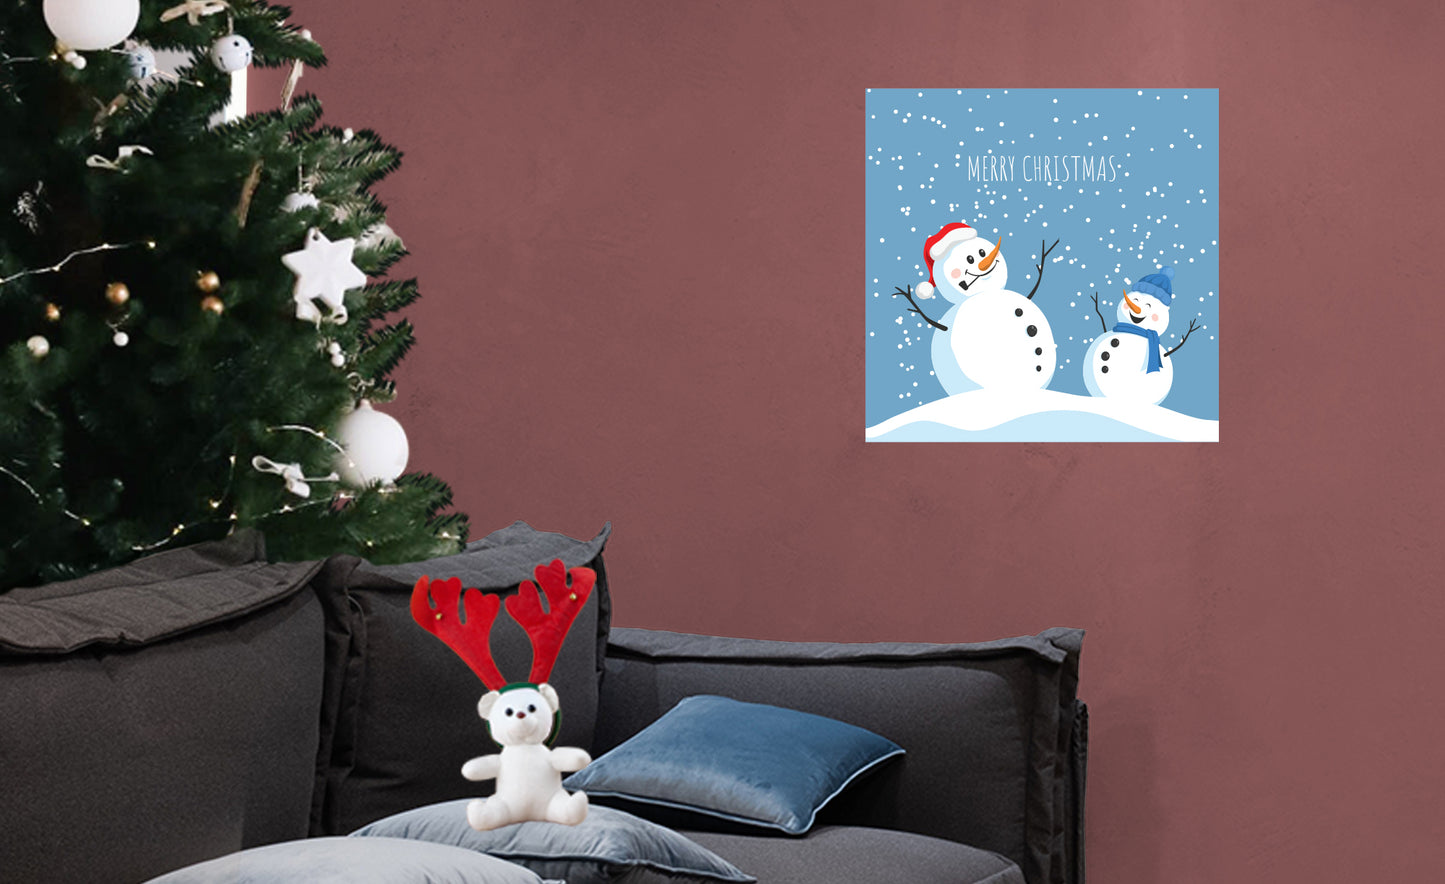 Seasons Decor: Winter Snowman Mural        -   Removable     Adhesive Decal